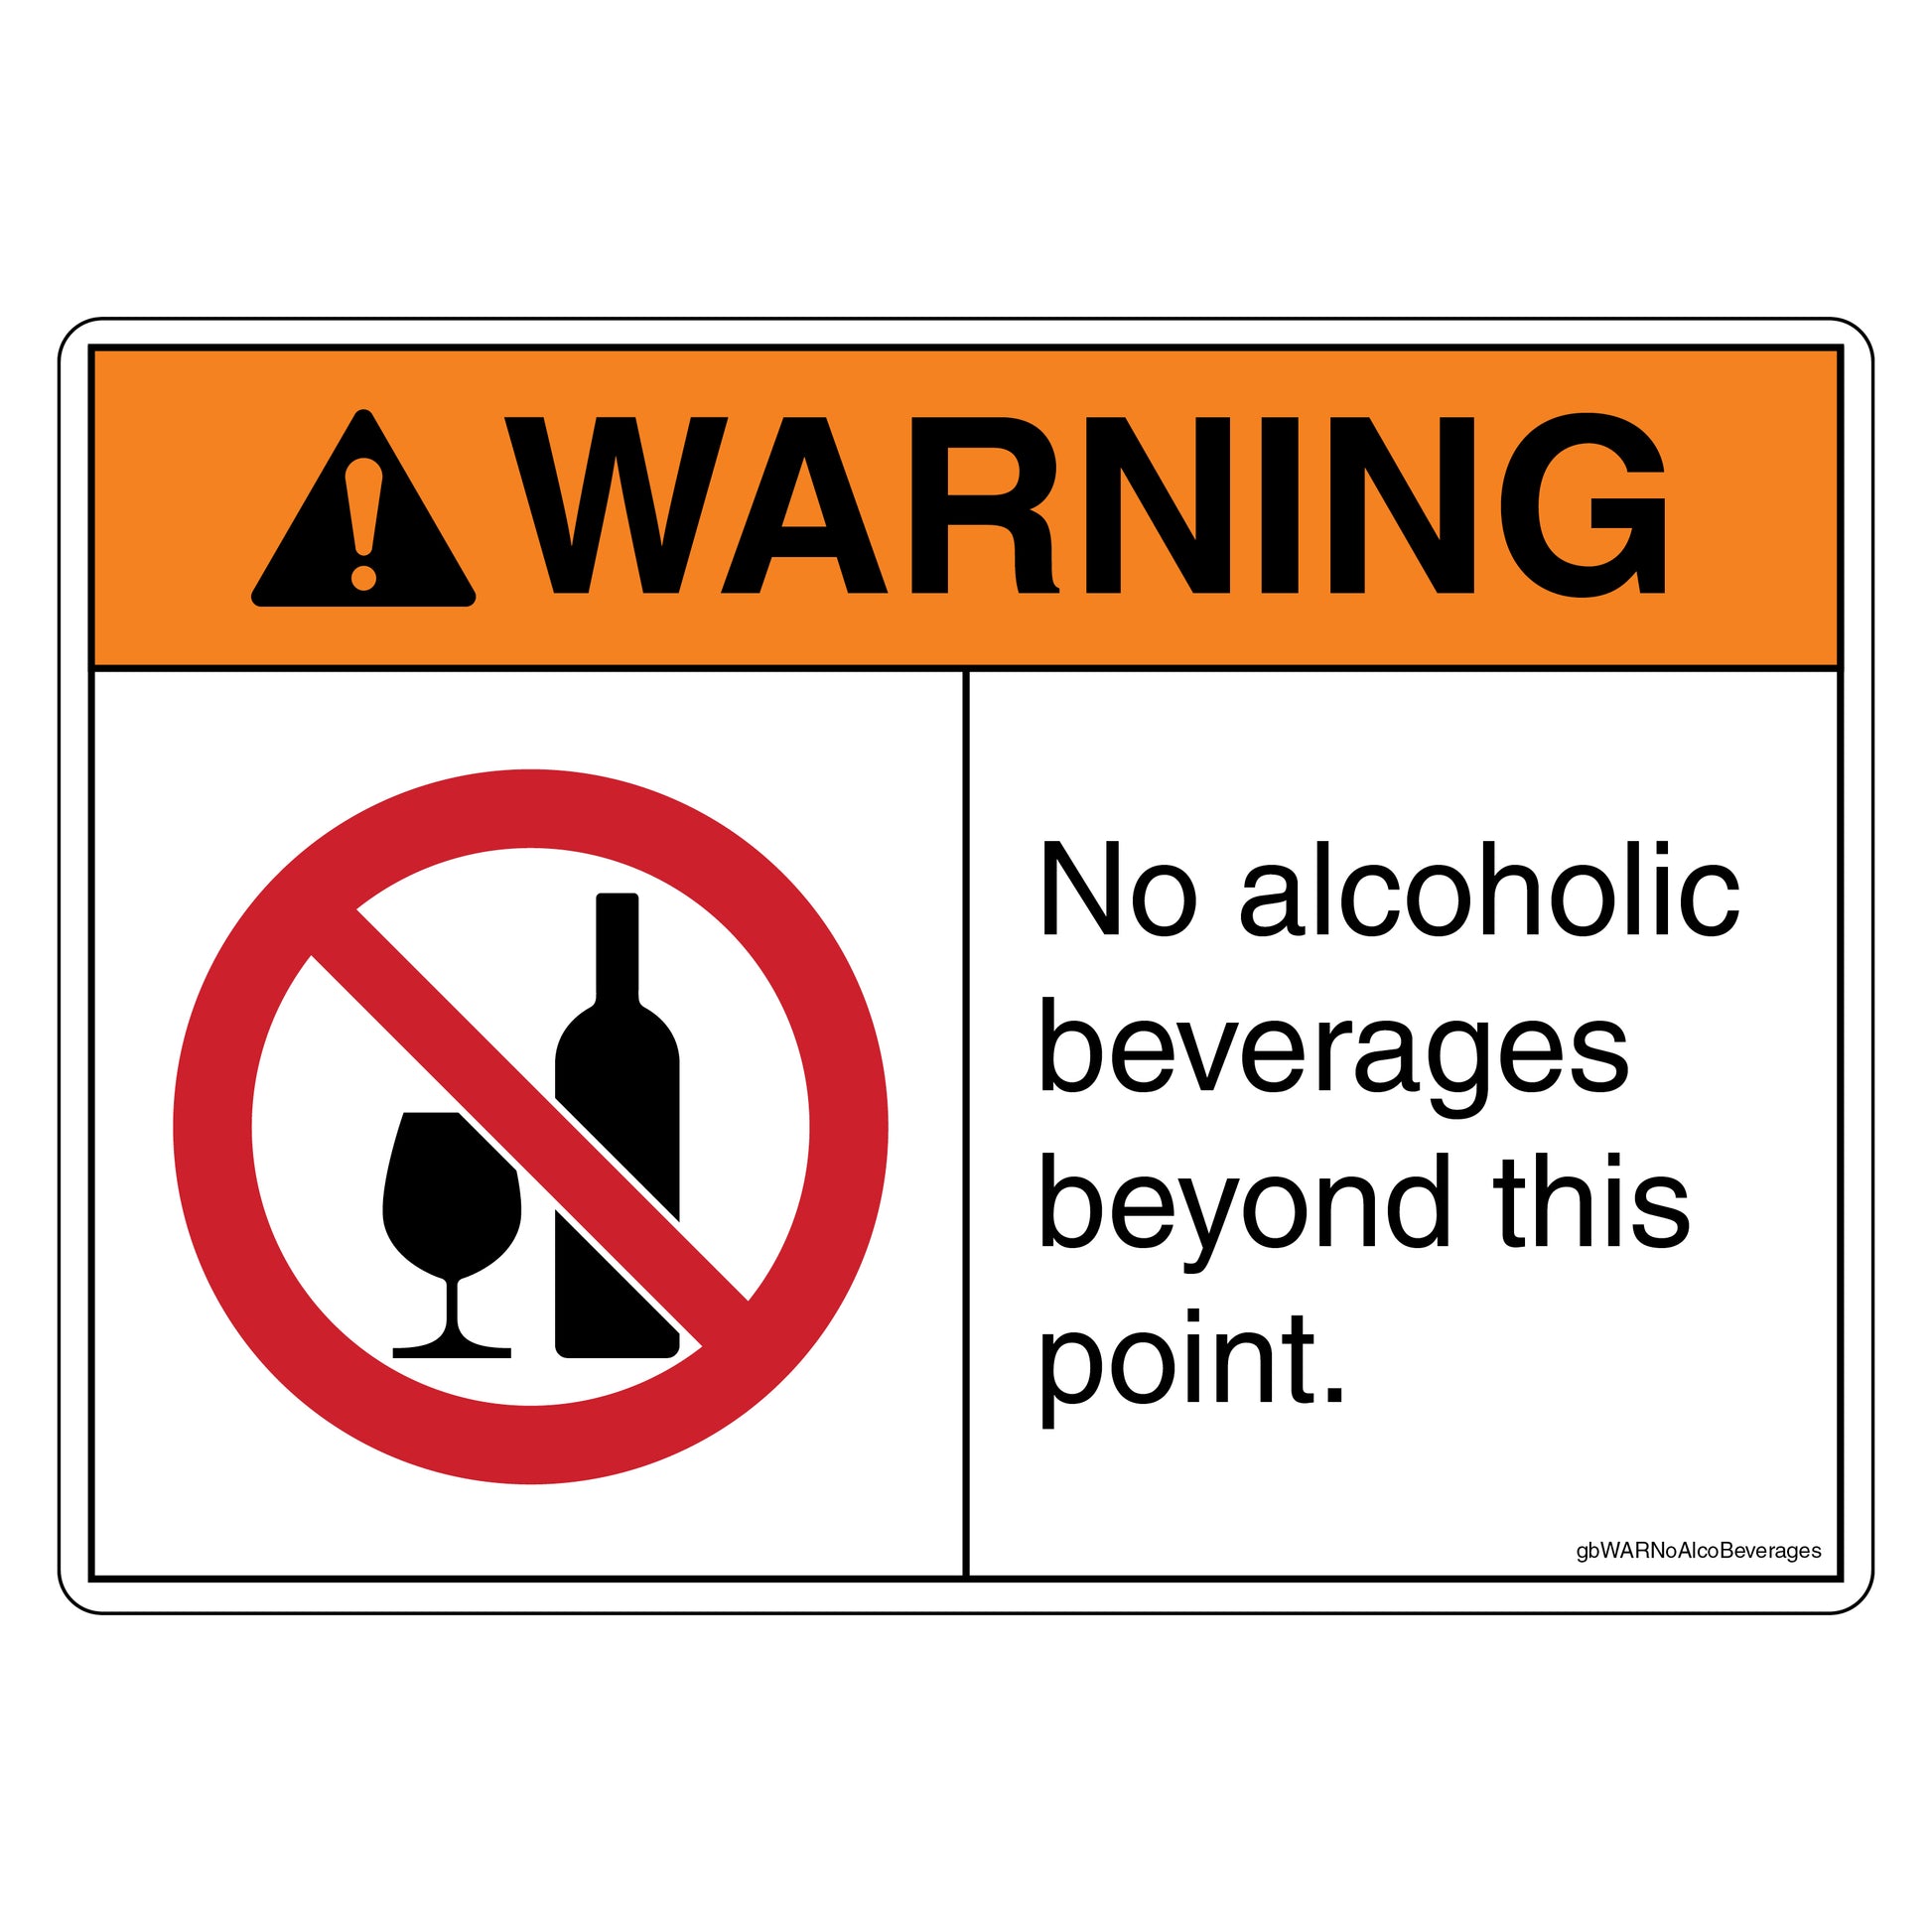 Warning No Alcoholic Beverages Beyond This Point Decal. 4 inches by 3 inches in size.